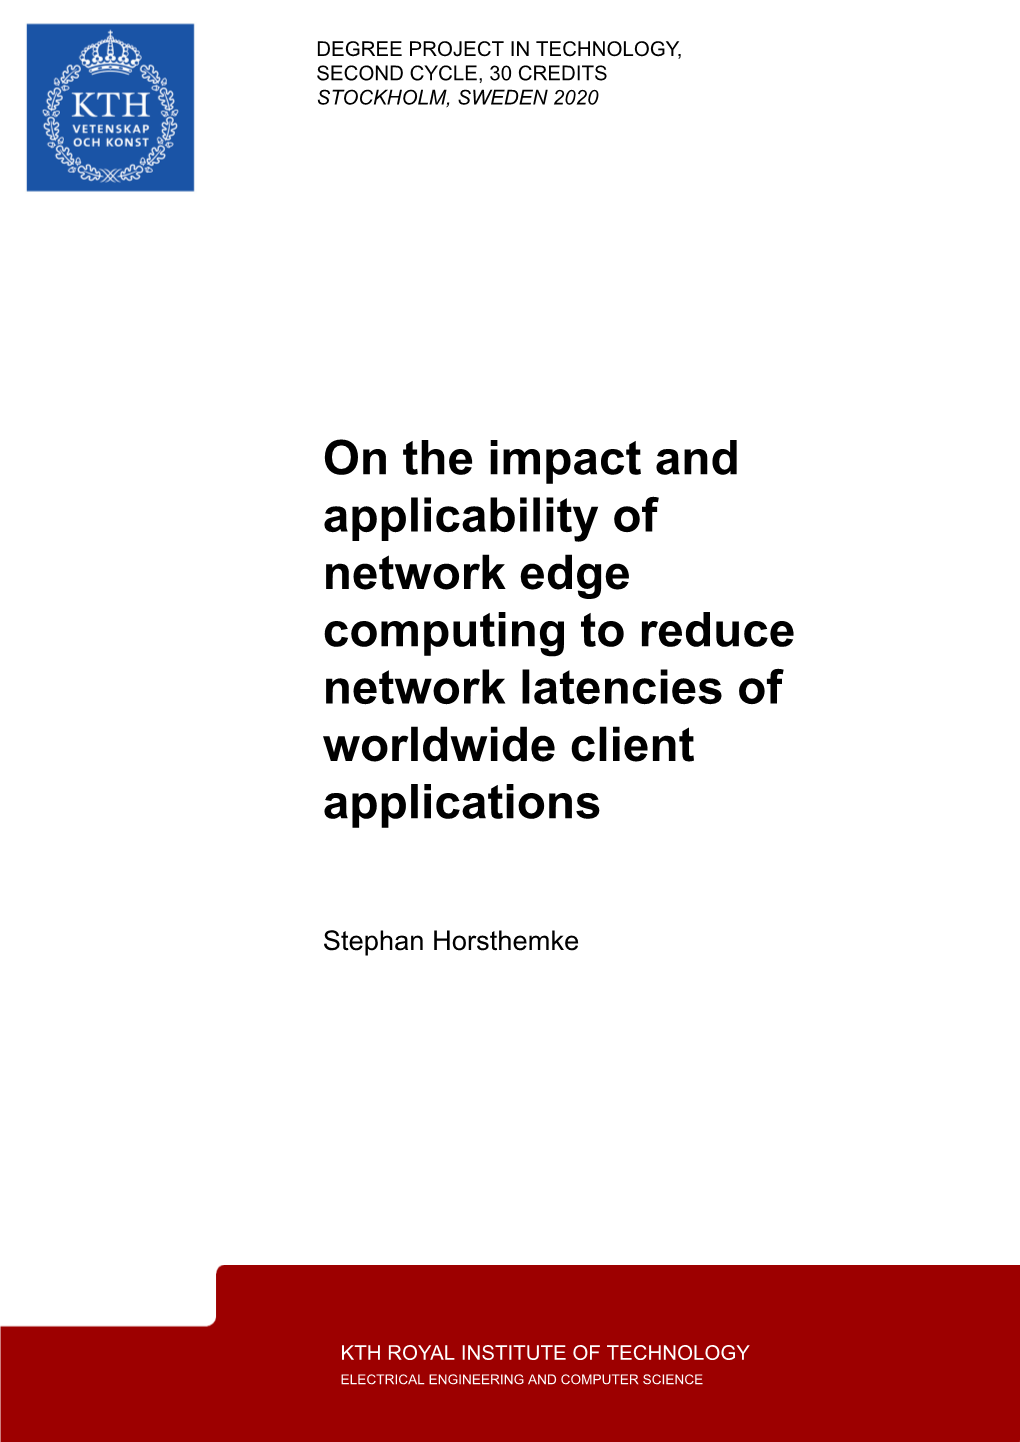 On the Impact and Applicability of Network Edge Computing to Reduce Network Latencies of Worldwide Client Applications